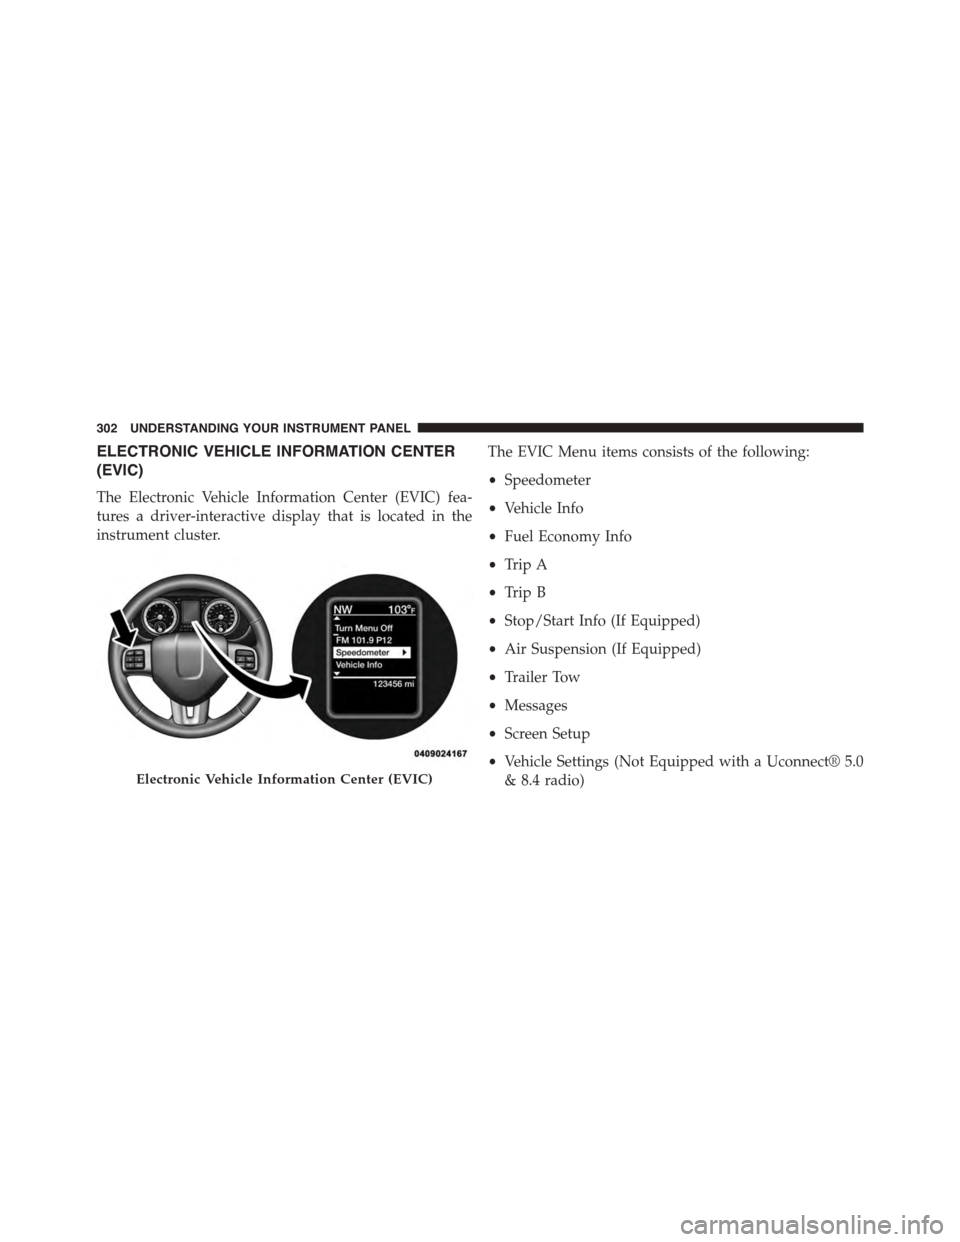 Ram 1500 2015  Owners Manual ELECTRONIC VEHICLE INFORMATION CENTER
(EVIC)
The Electronic Vehicle Information Center (EVIC) fea-
tures a driver-interactive display that is located in the
instrument cluster.
The EVIC Menu items con